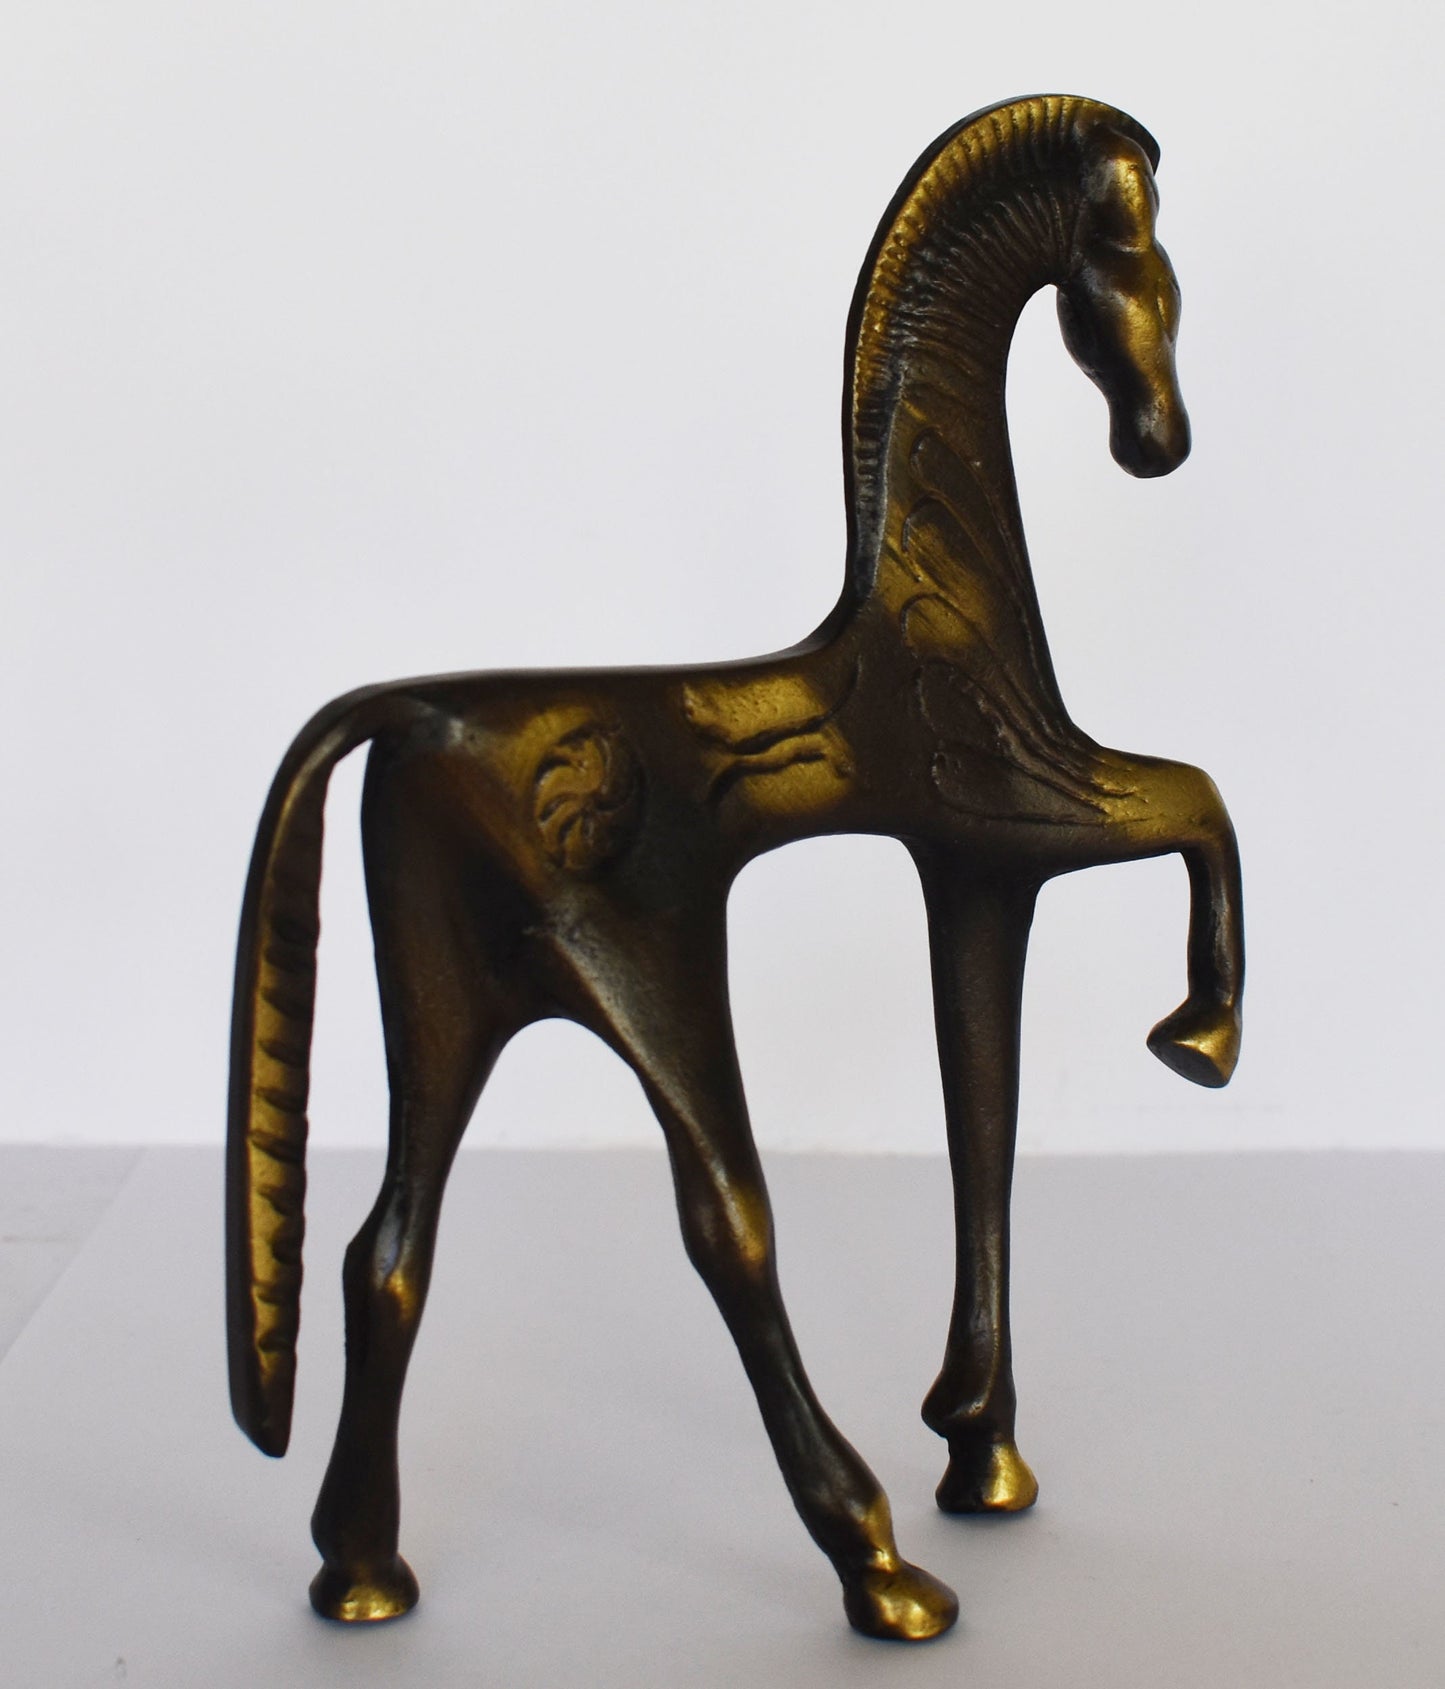 Ancient Greek Horse - In motion - pure Bronze Sculpture - Symbol of Wealth and Prosperity